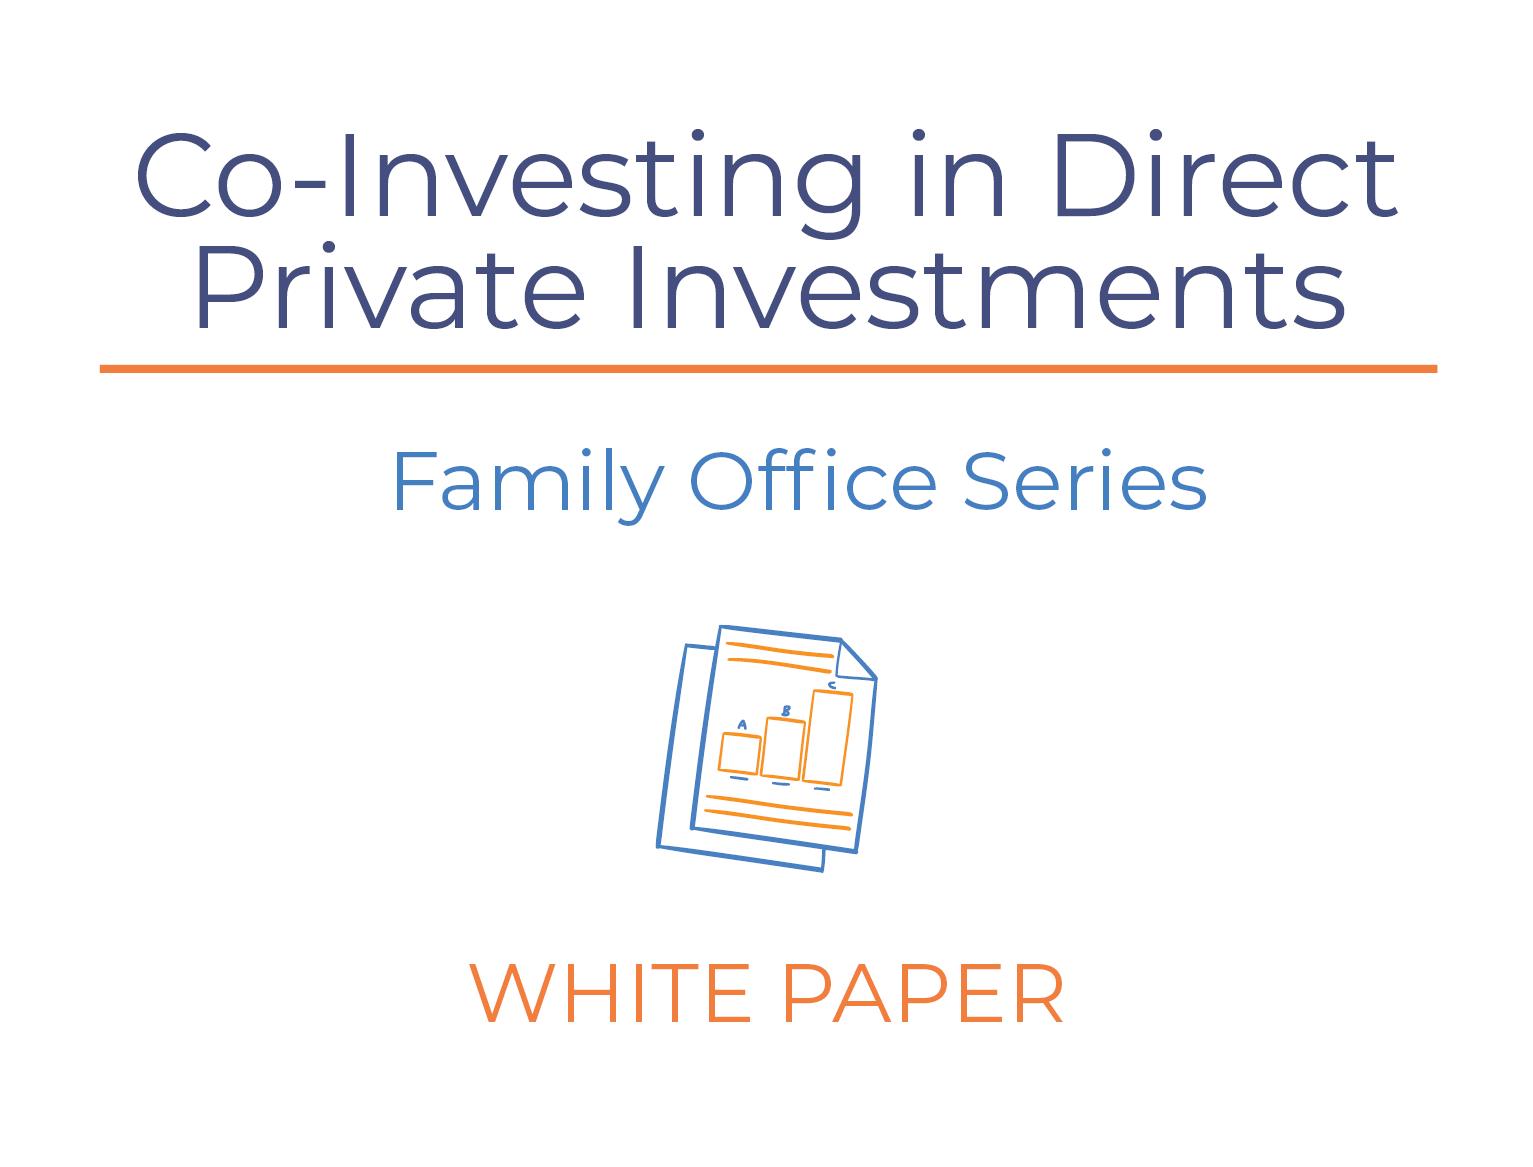 Co-Investing in Direct Private Investments